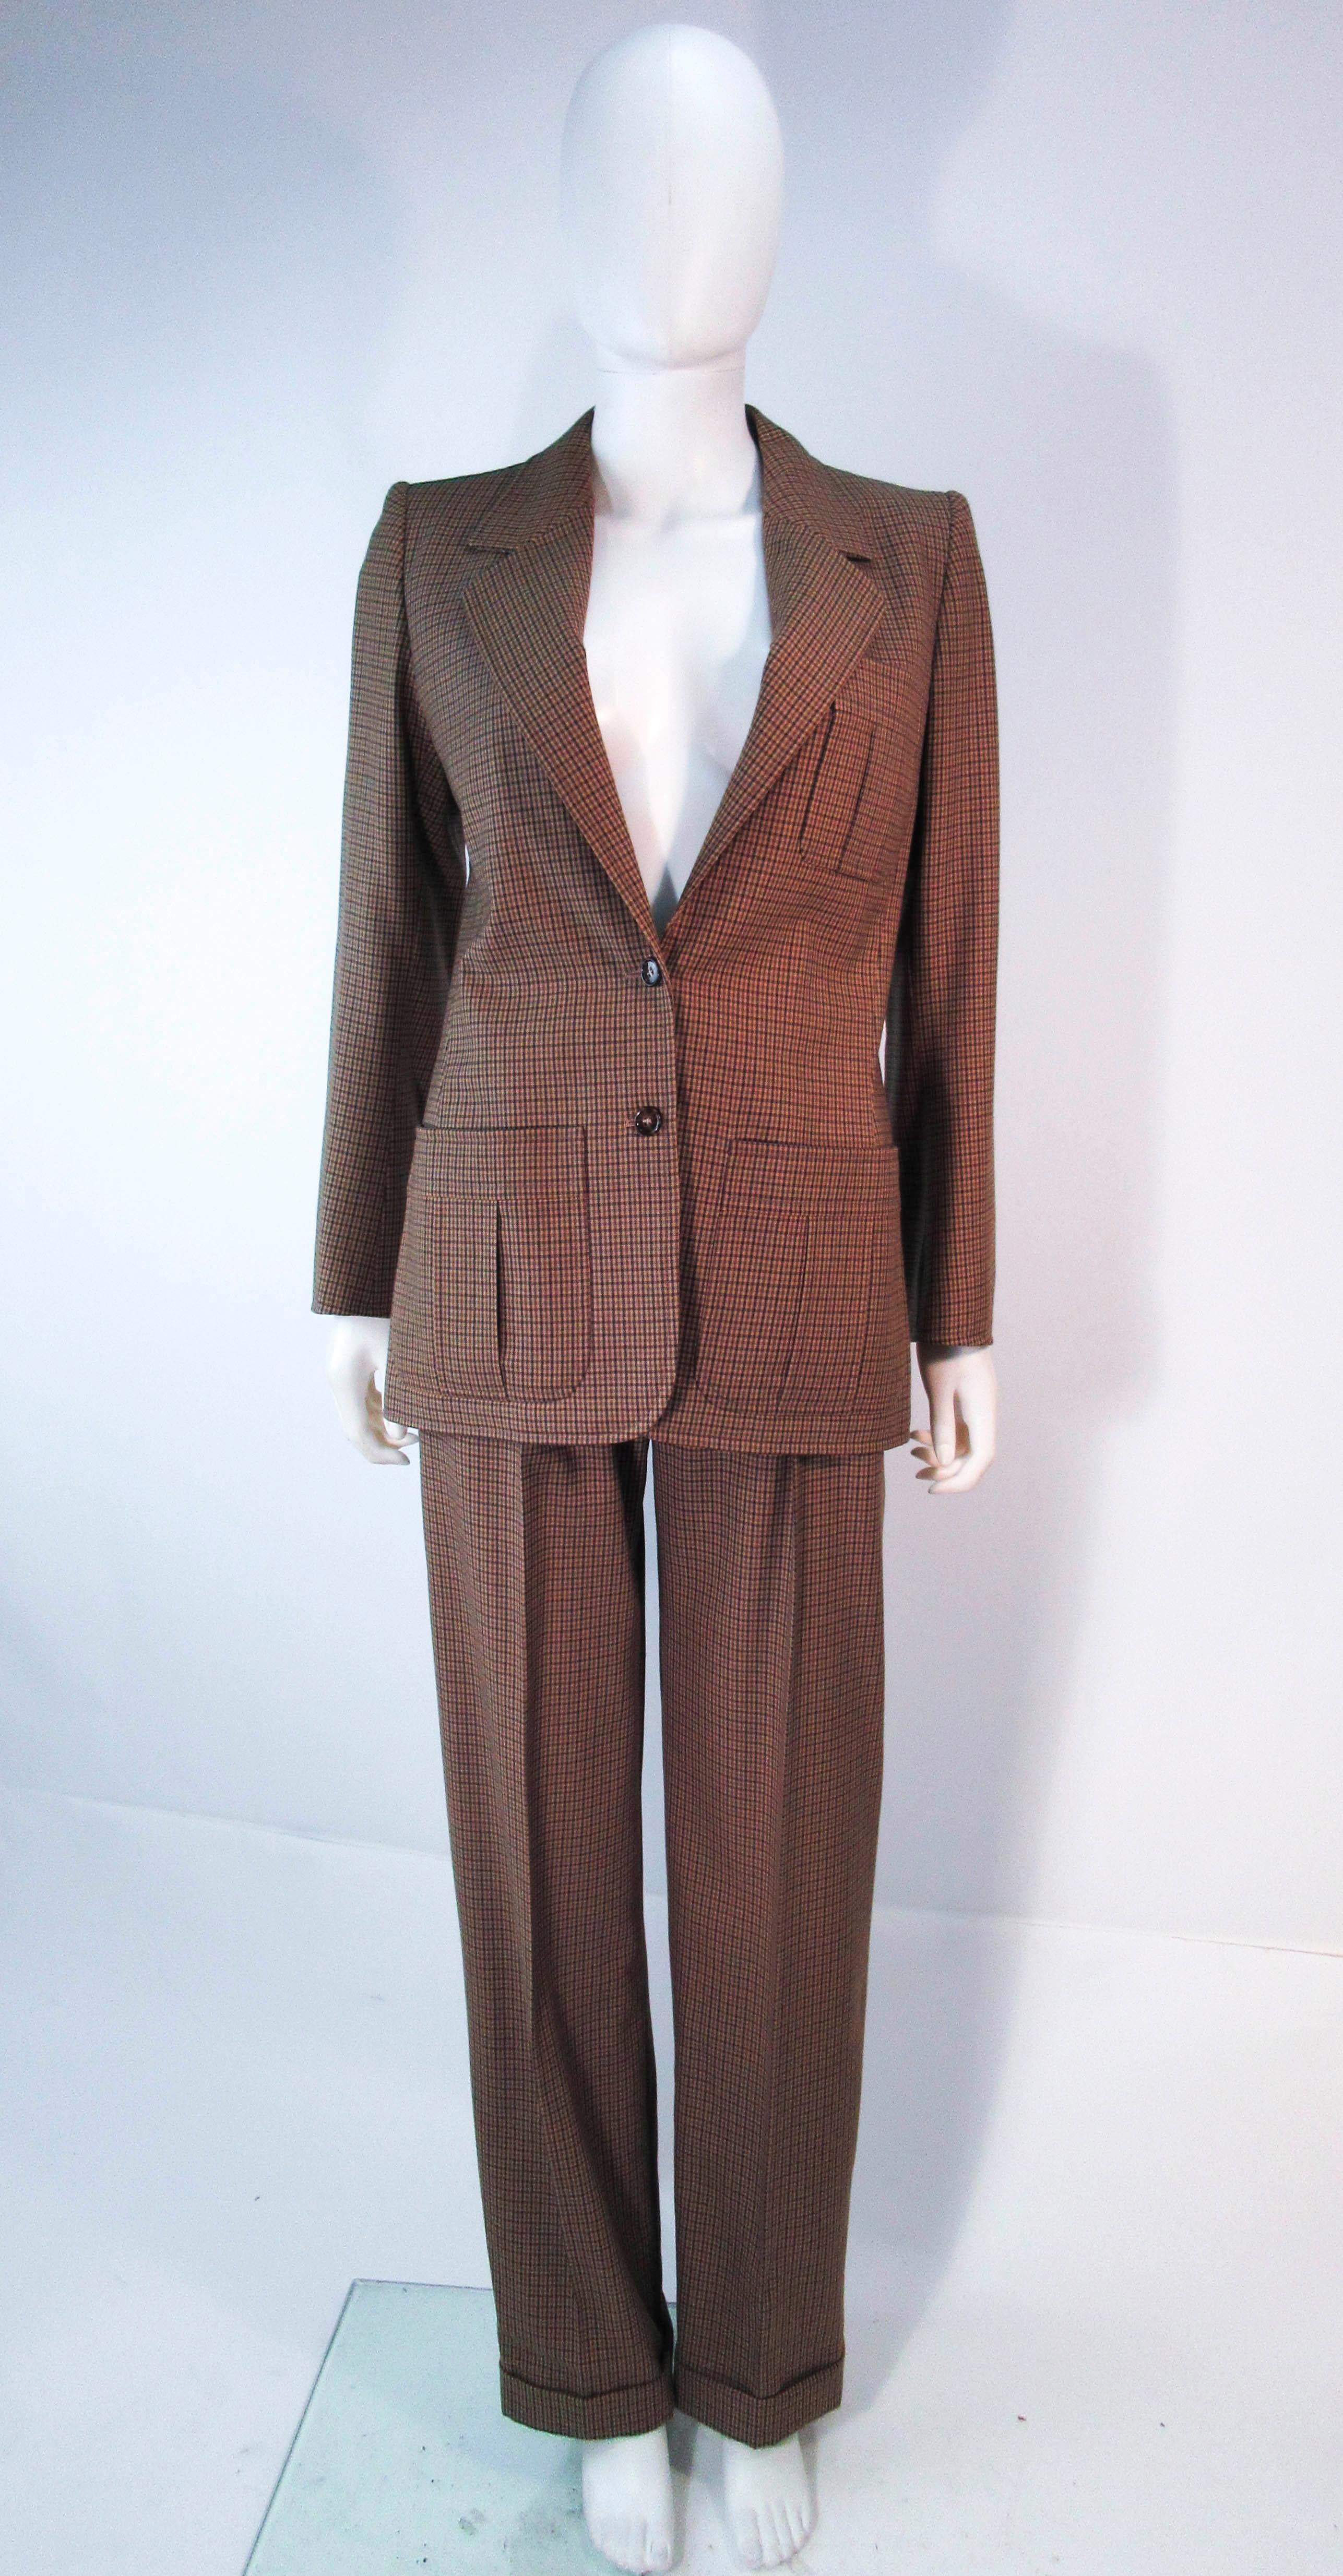 This Yves Saint Laurent suit is composed of a brown grey plaid wool. Features a beautiful classic blazer with pockets and a wonderful pleated trouser with belt. In excellent vintage condition (some signs of wear due to age). Made in